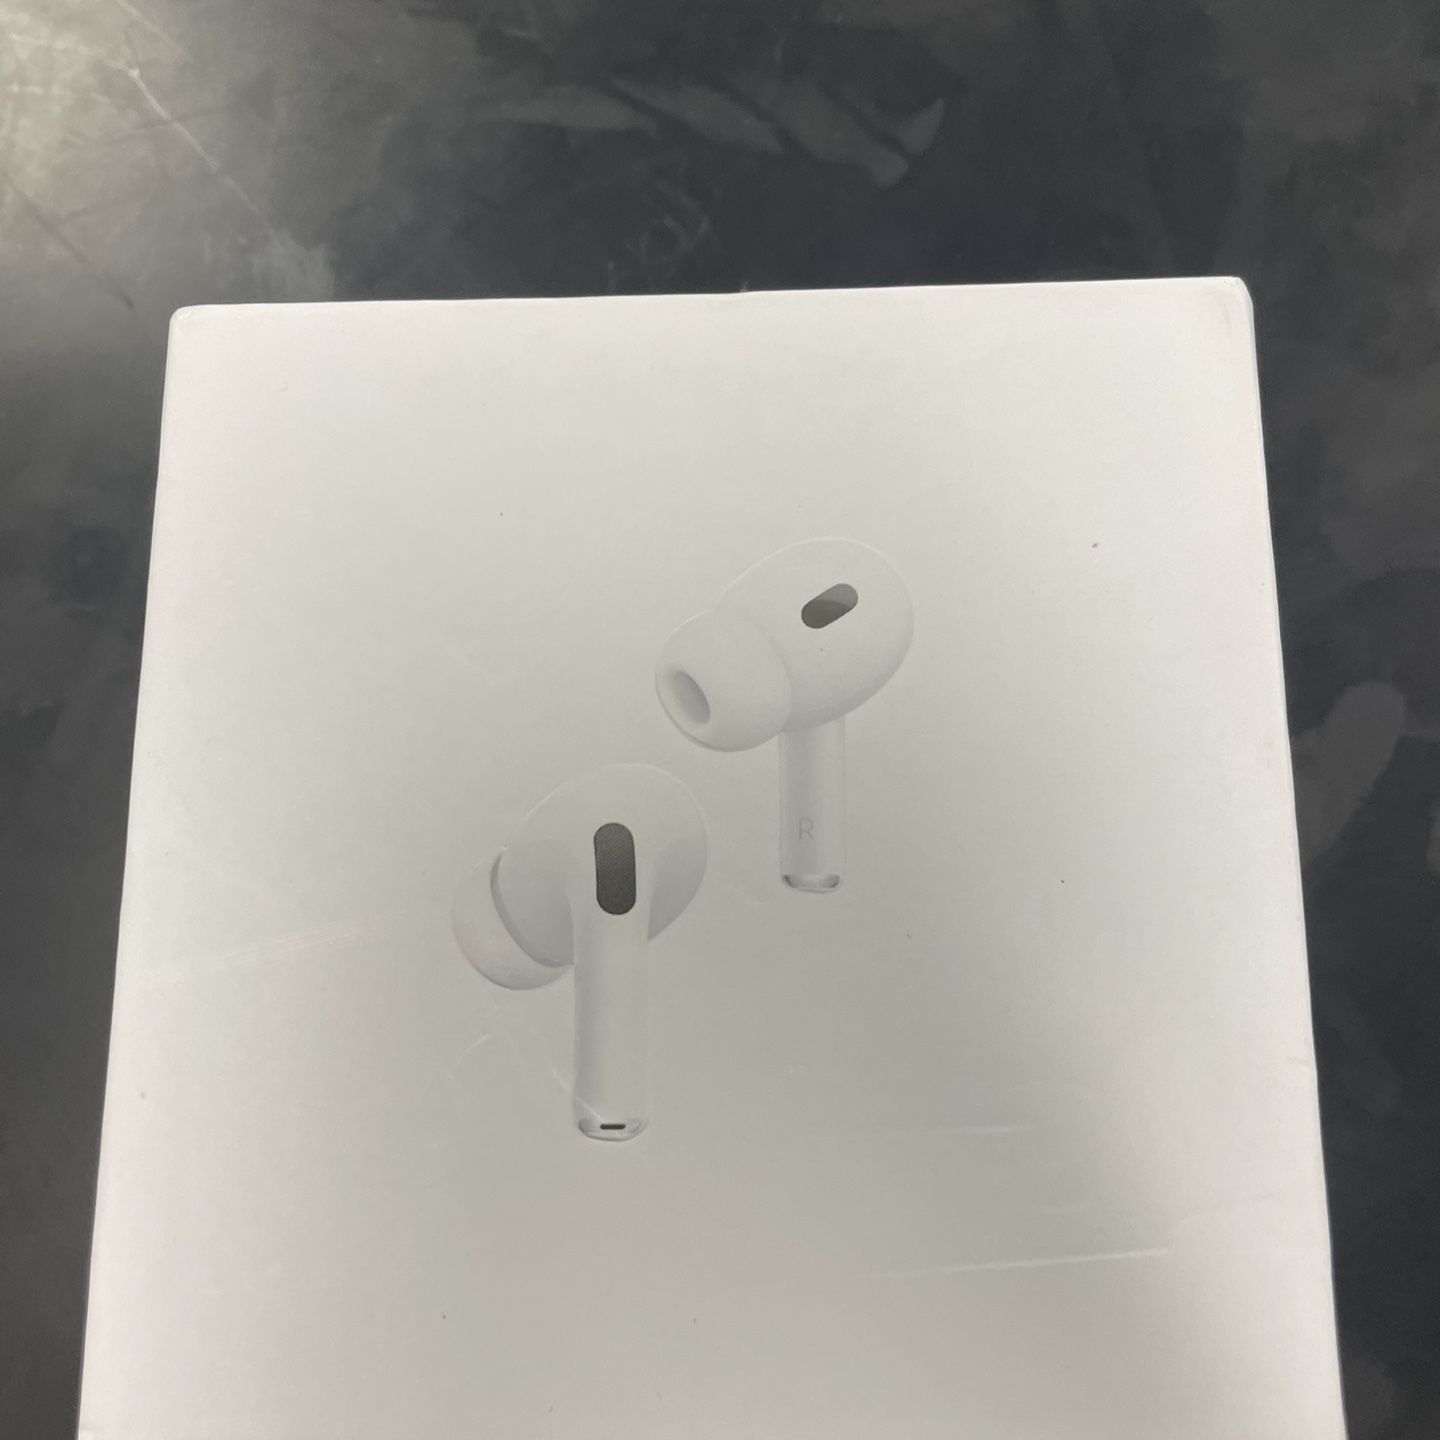 Airpods pro’s 2nd generation 